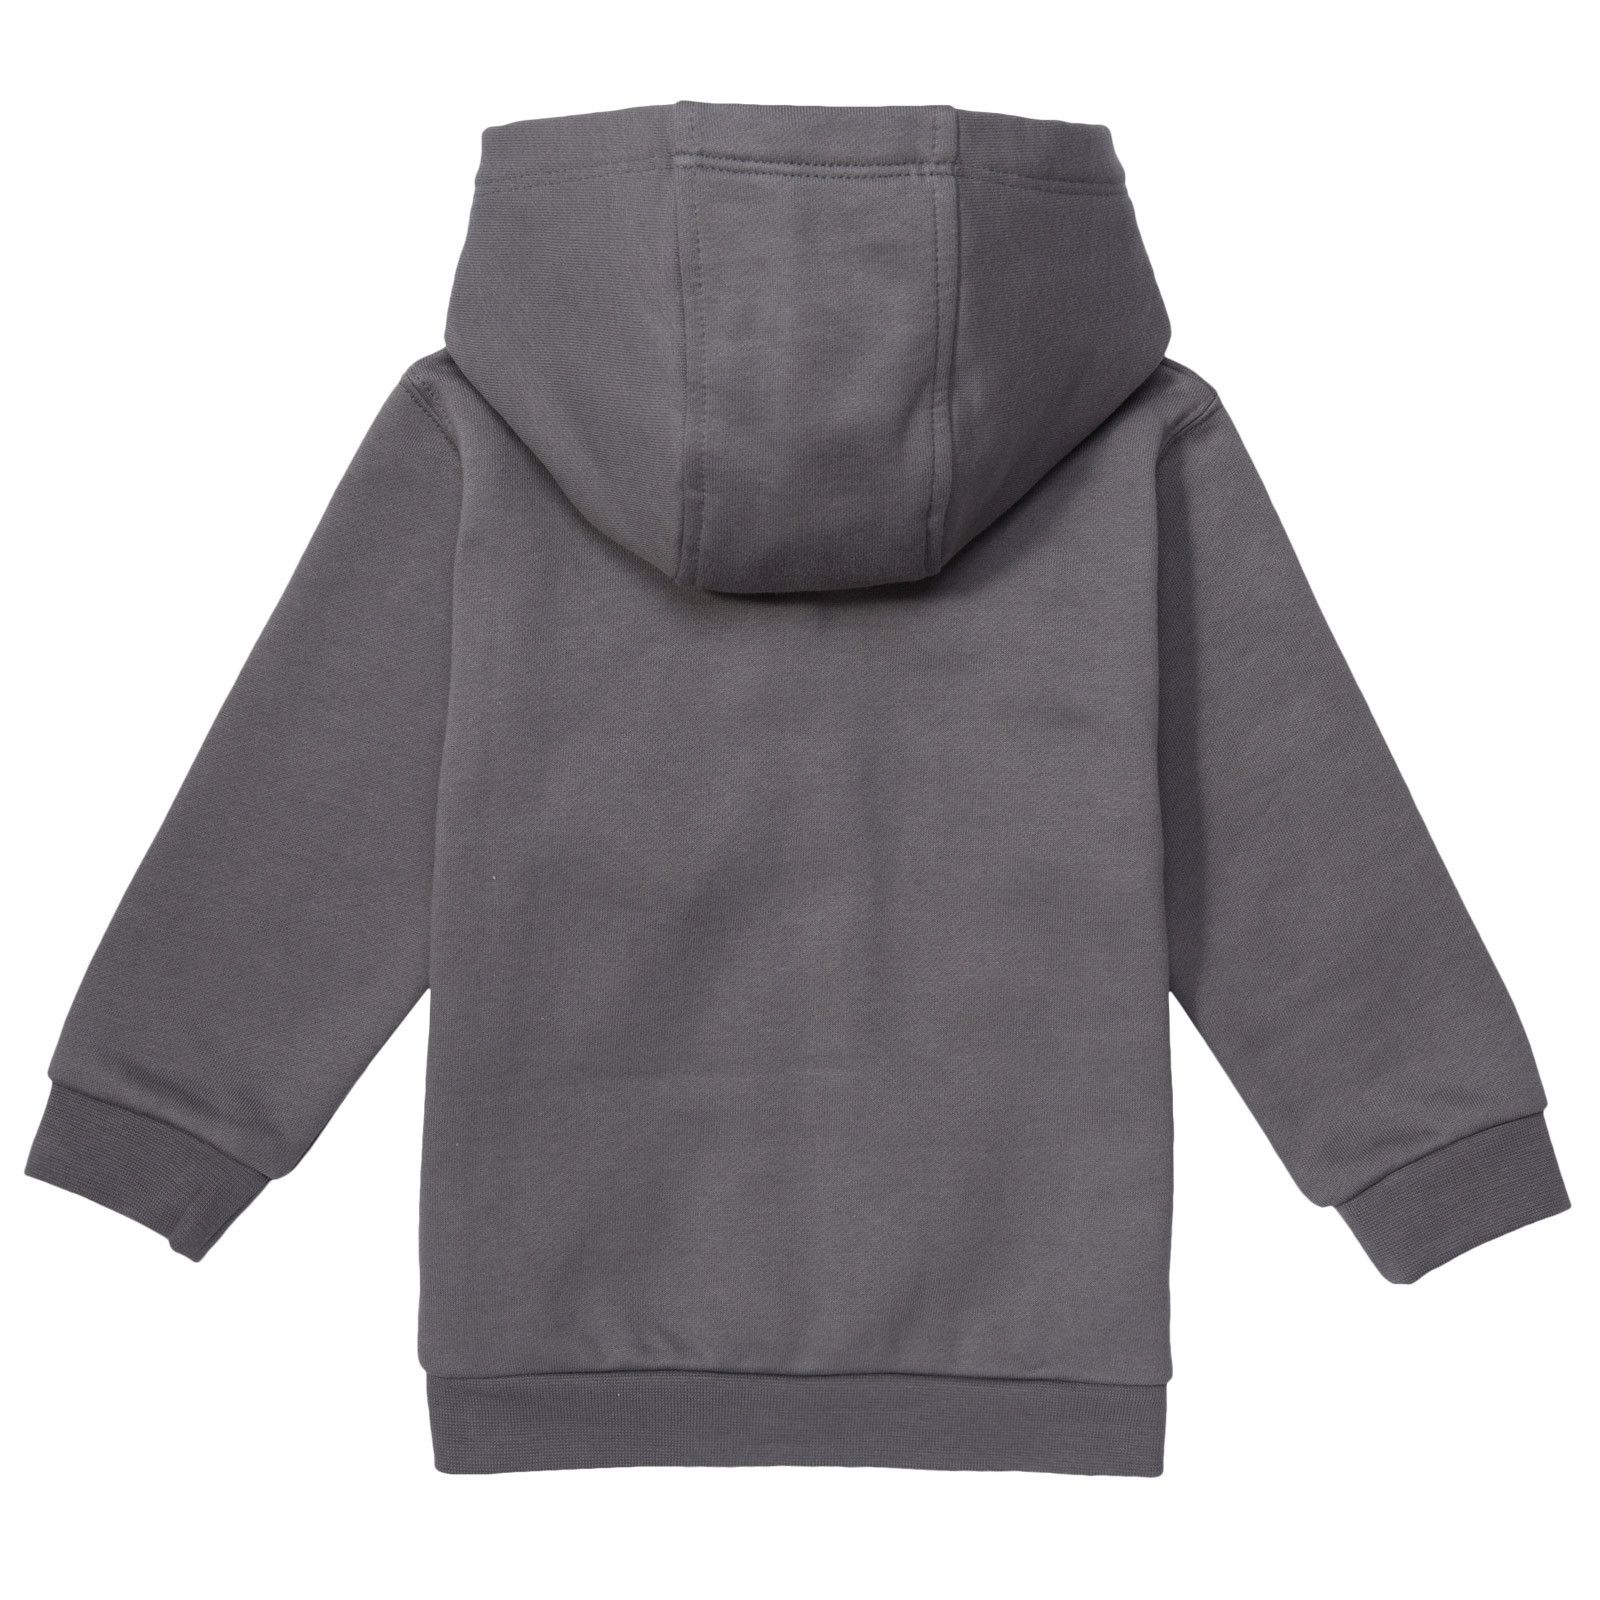 Boys Grey Tracksuit With Check Lined Hood - CÉMAROSE | Children's Fashion Store - 6